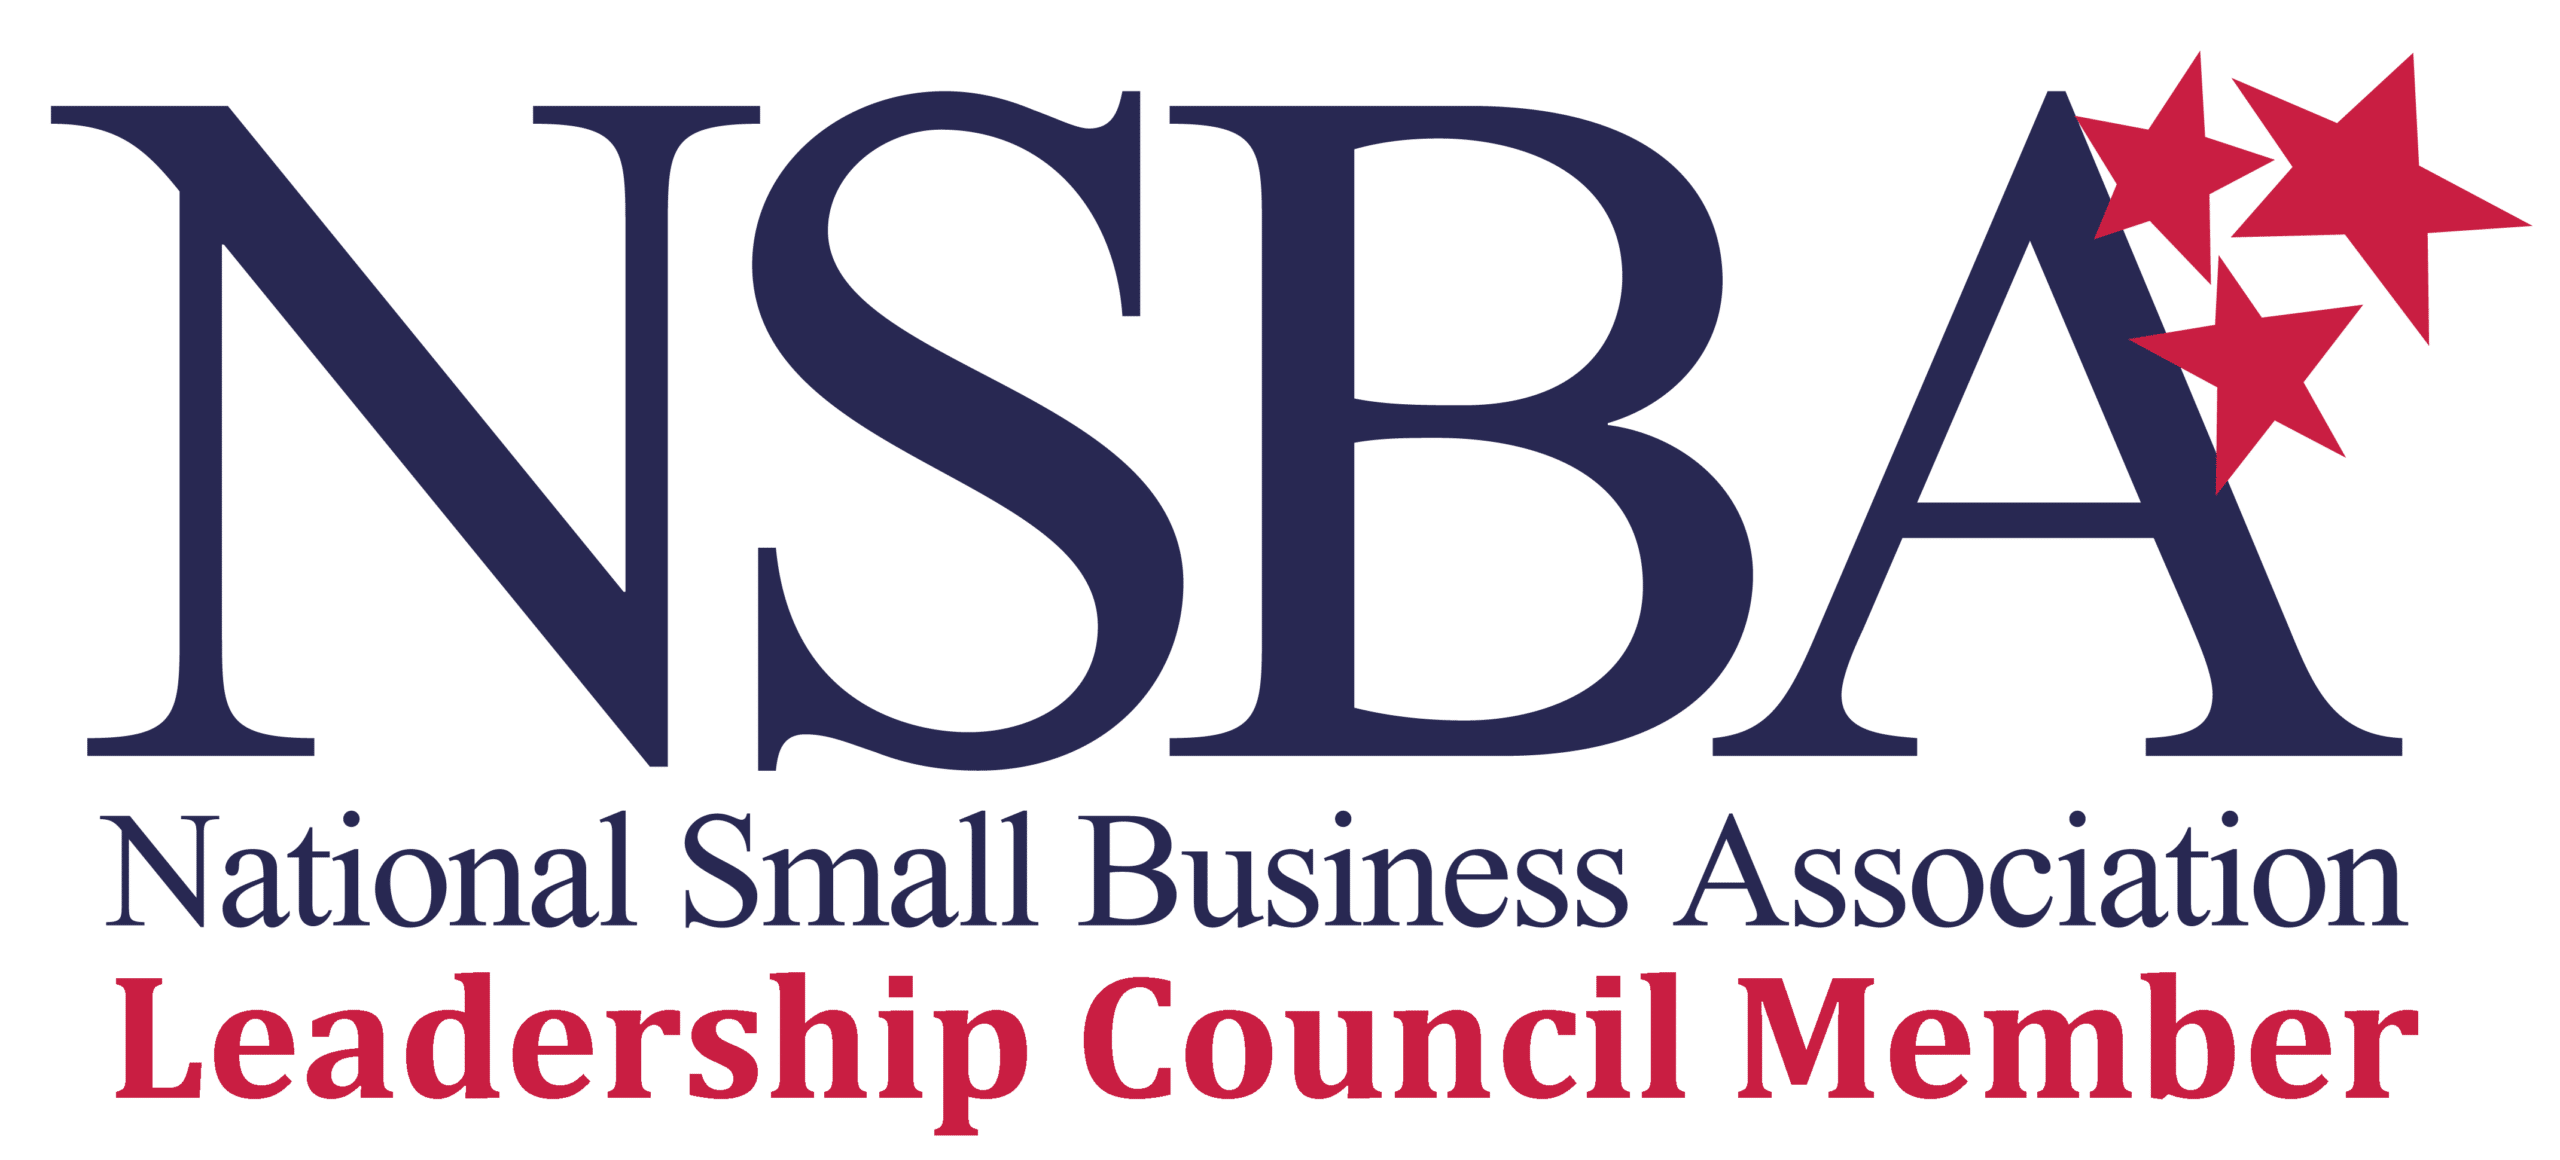 Christopher Gersch Named to NSBA Leadership Council